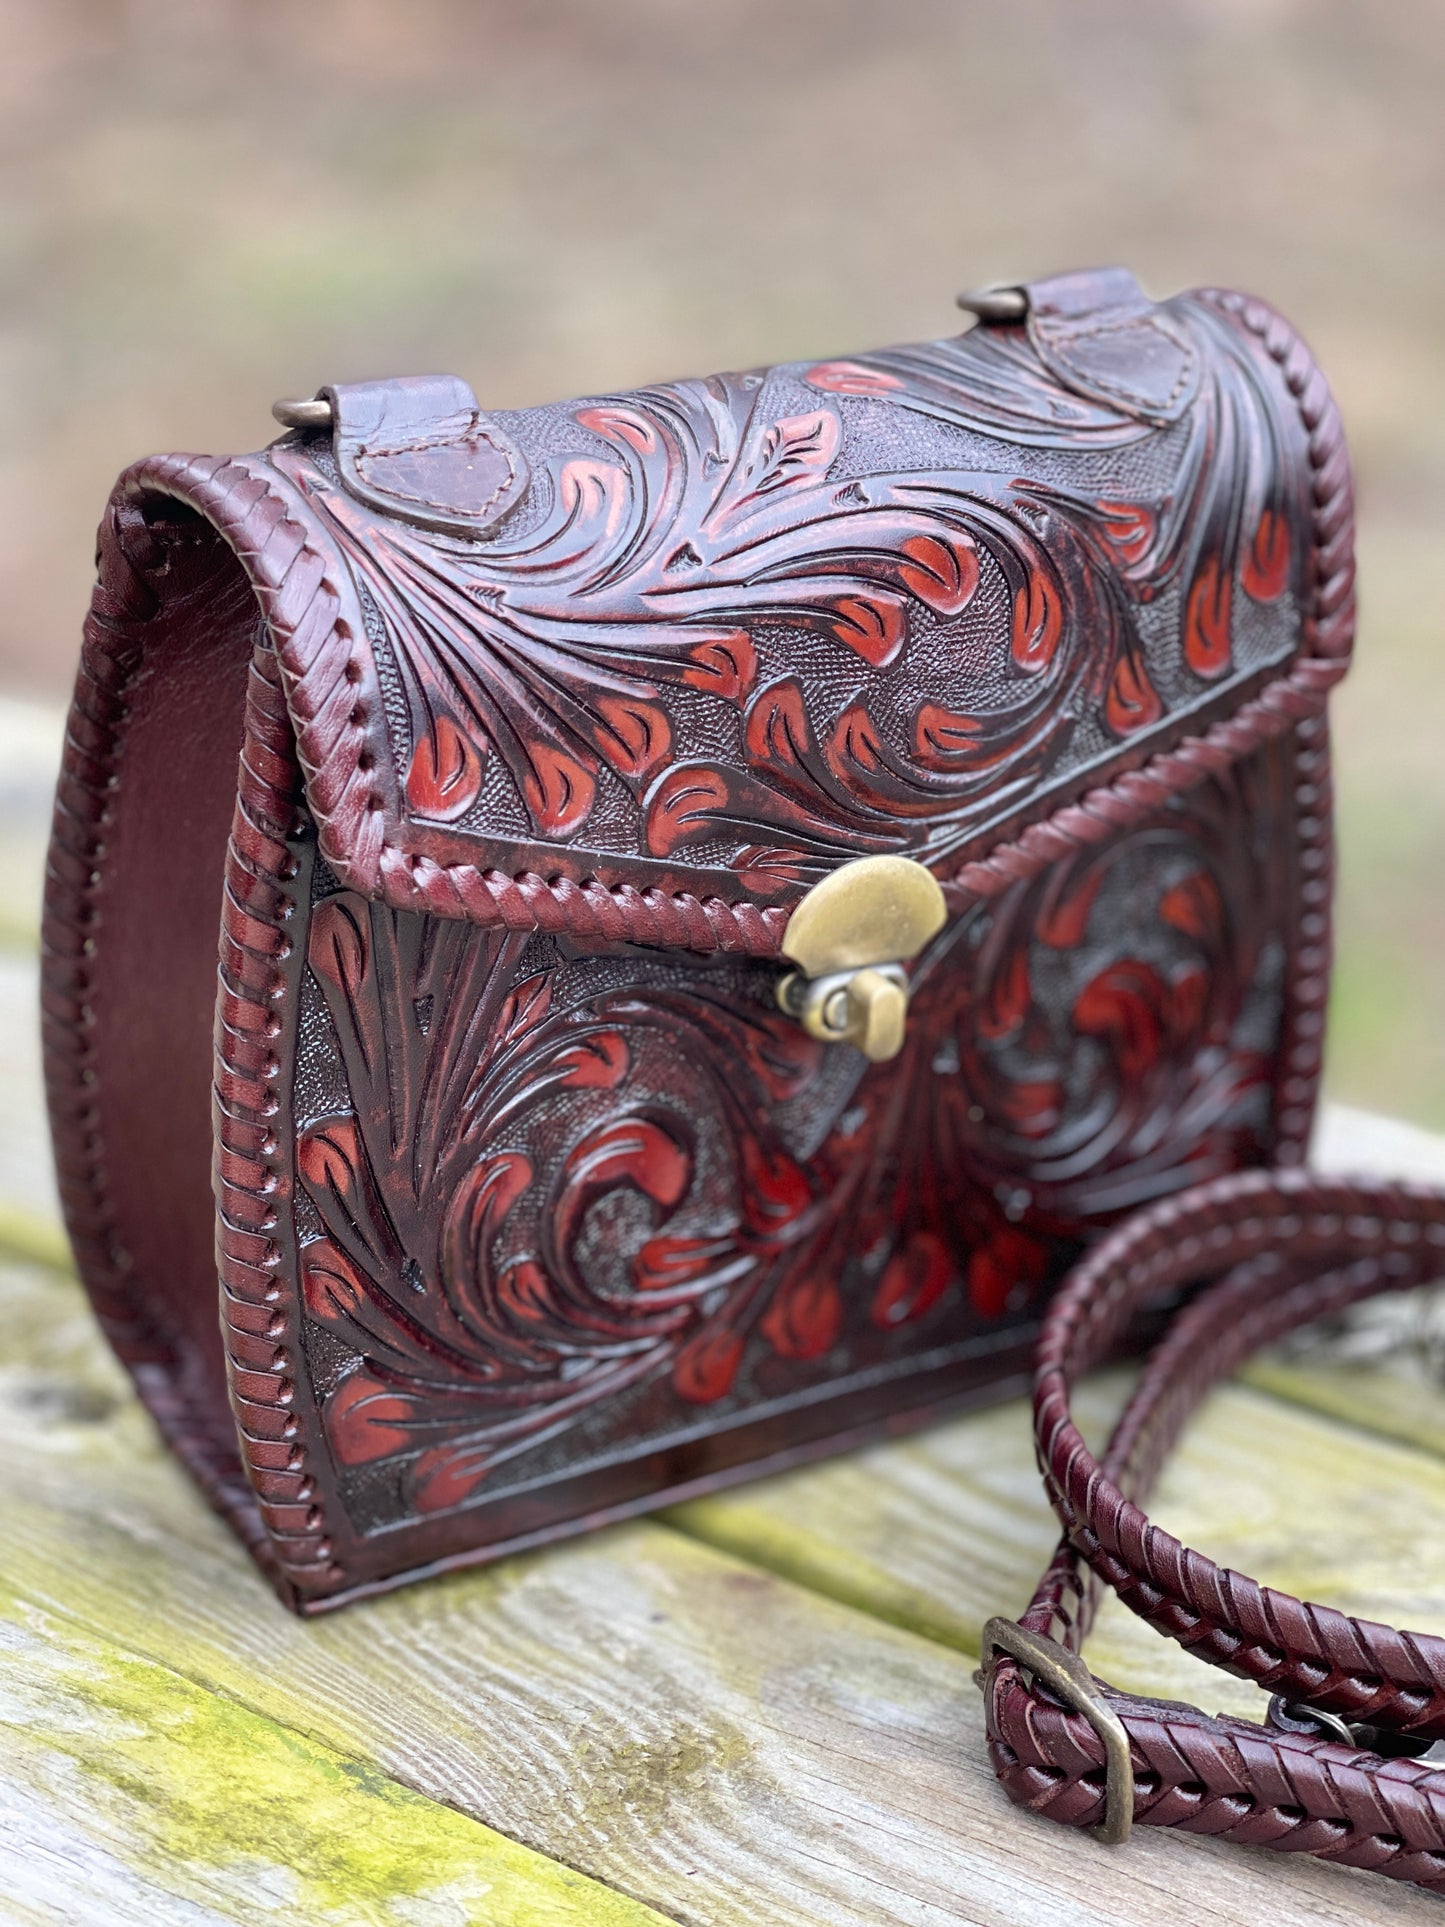 Hand-Tooled Leather Mini Satchel - Crossbody "ERICKA" by ALLE - ALLE Handbags